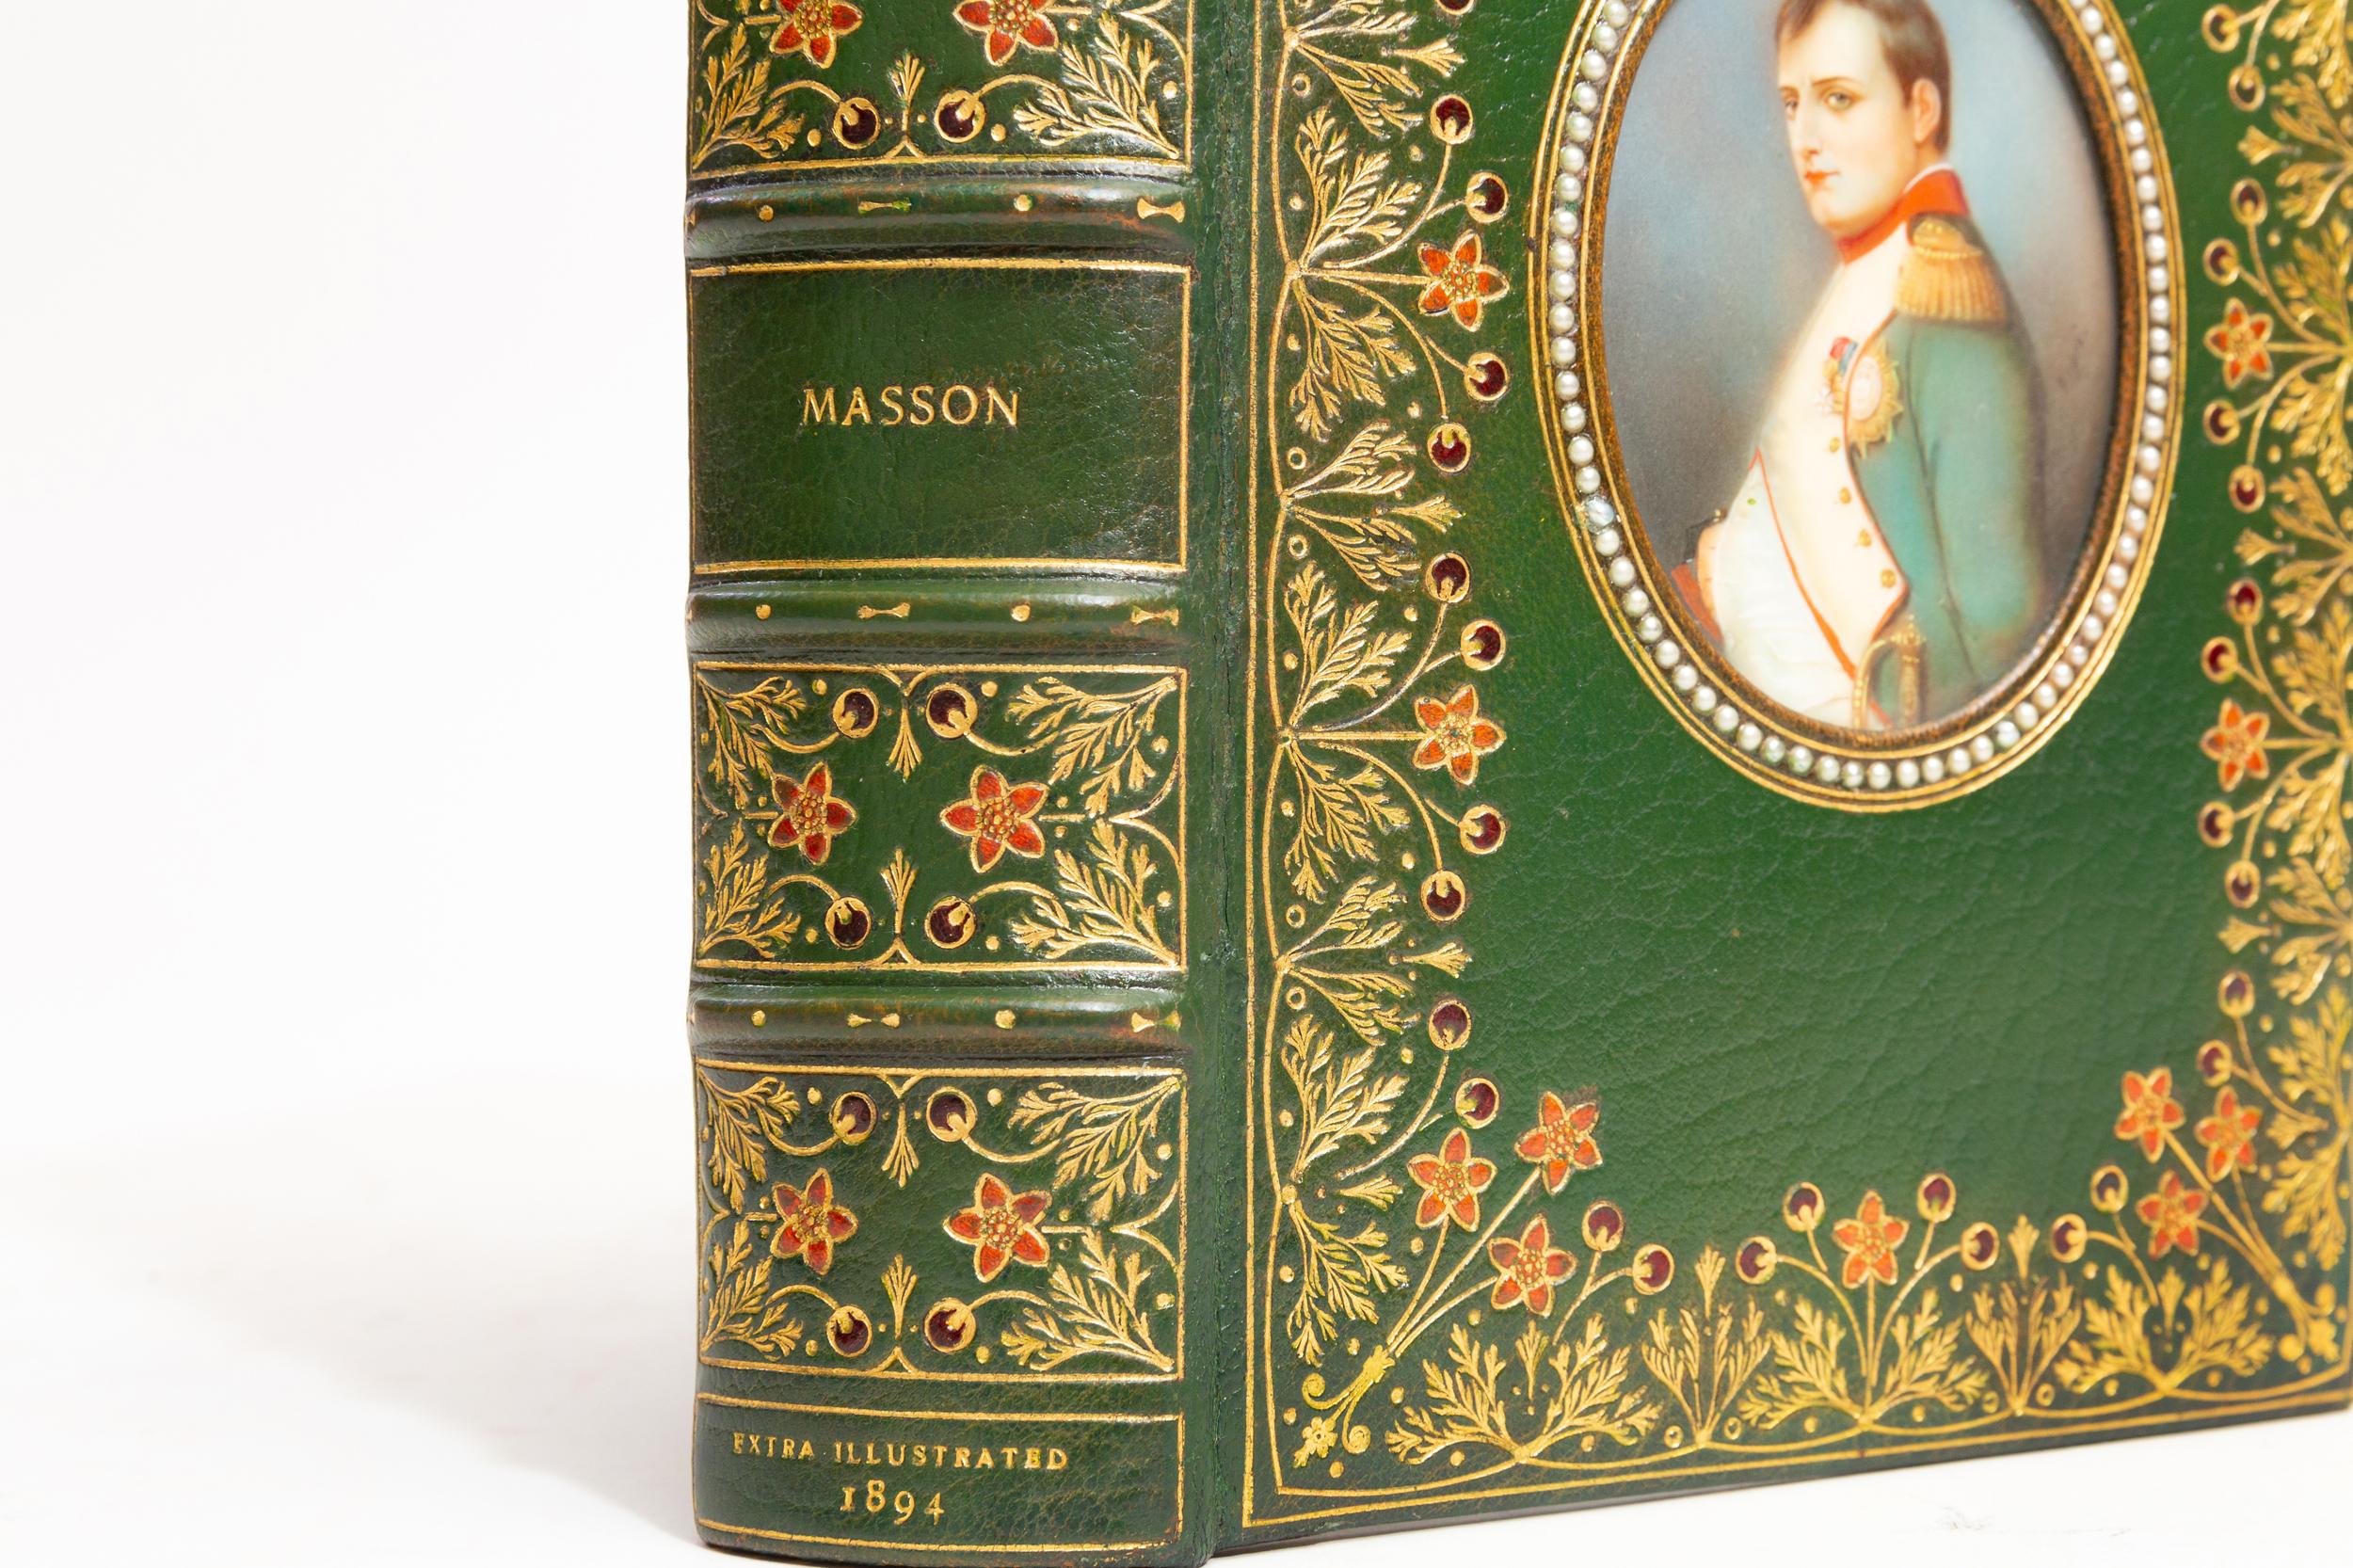 1 Volume. Frederic Masson, Napoleon and the Fair Sex. Bound in full green morocco. Decorative gilt floral tooling on covers. Miniature portrait of Napoleon, surrounded by semi-precious stones on front cover. Raised bands. Gilt floral tooling on